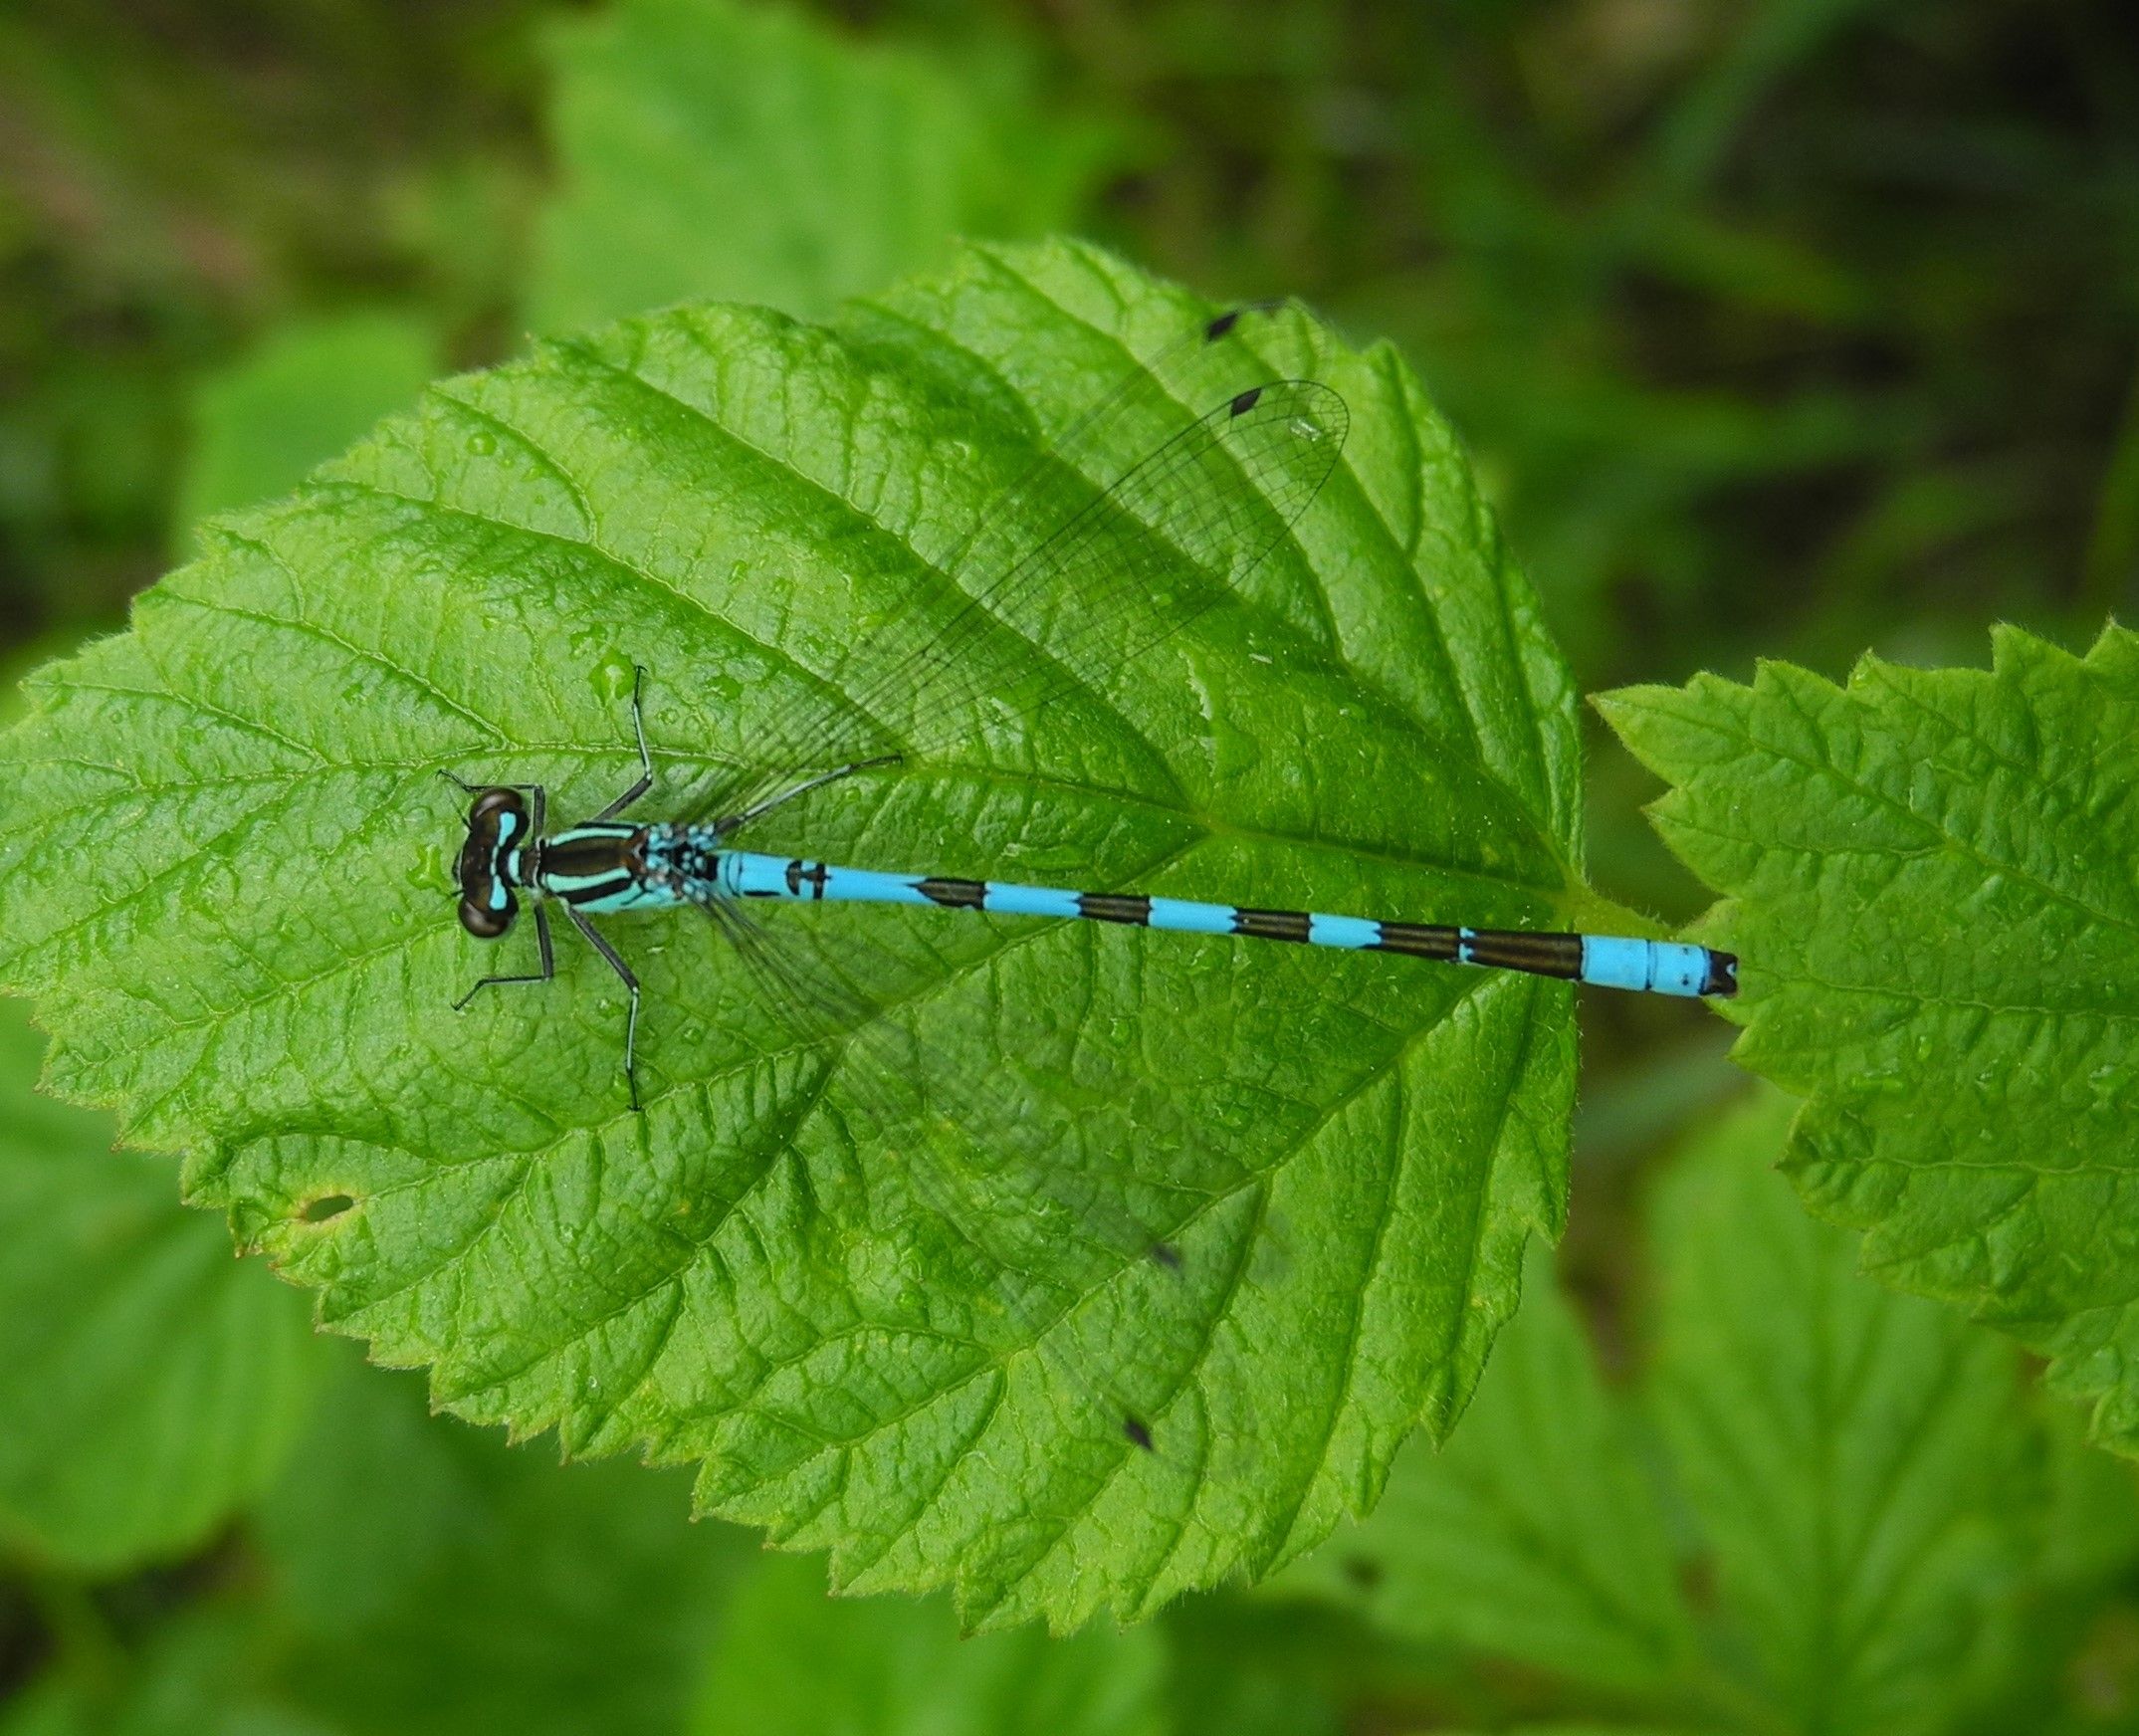 Image of a Northern Damselfly resting on a leaf